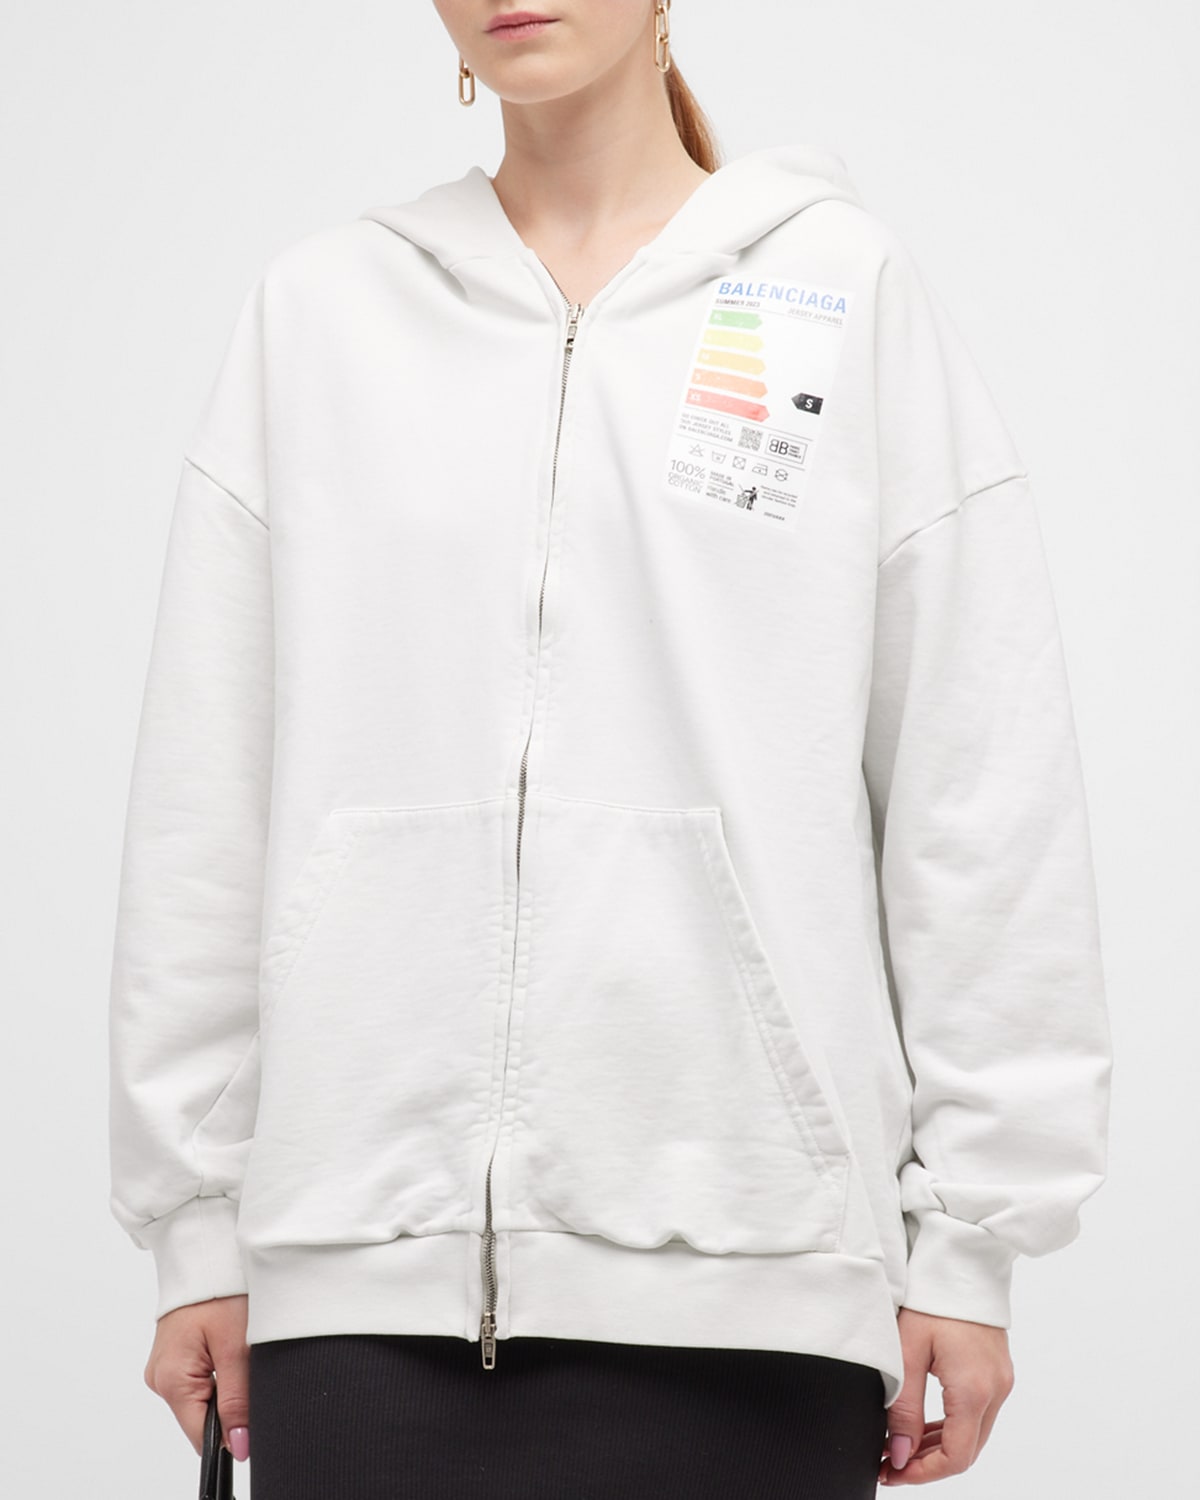 Balenciaga Energy Label Zip Up Hoodie Small Fit In 9012 Dirty White